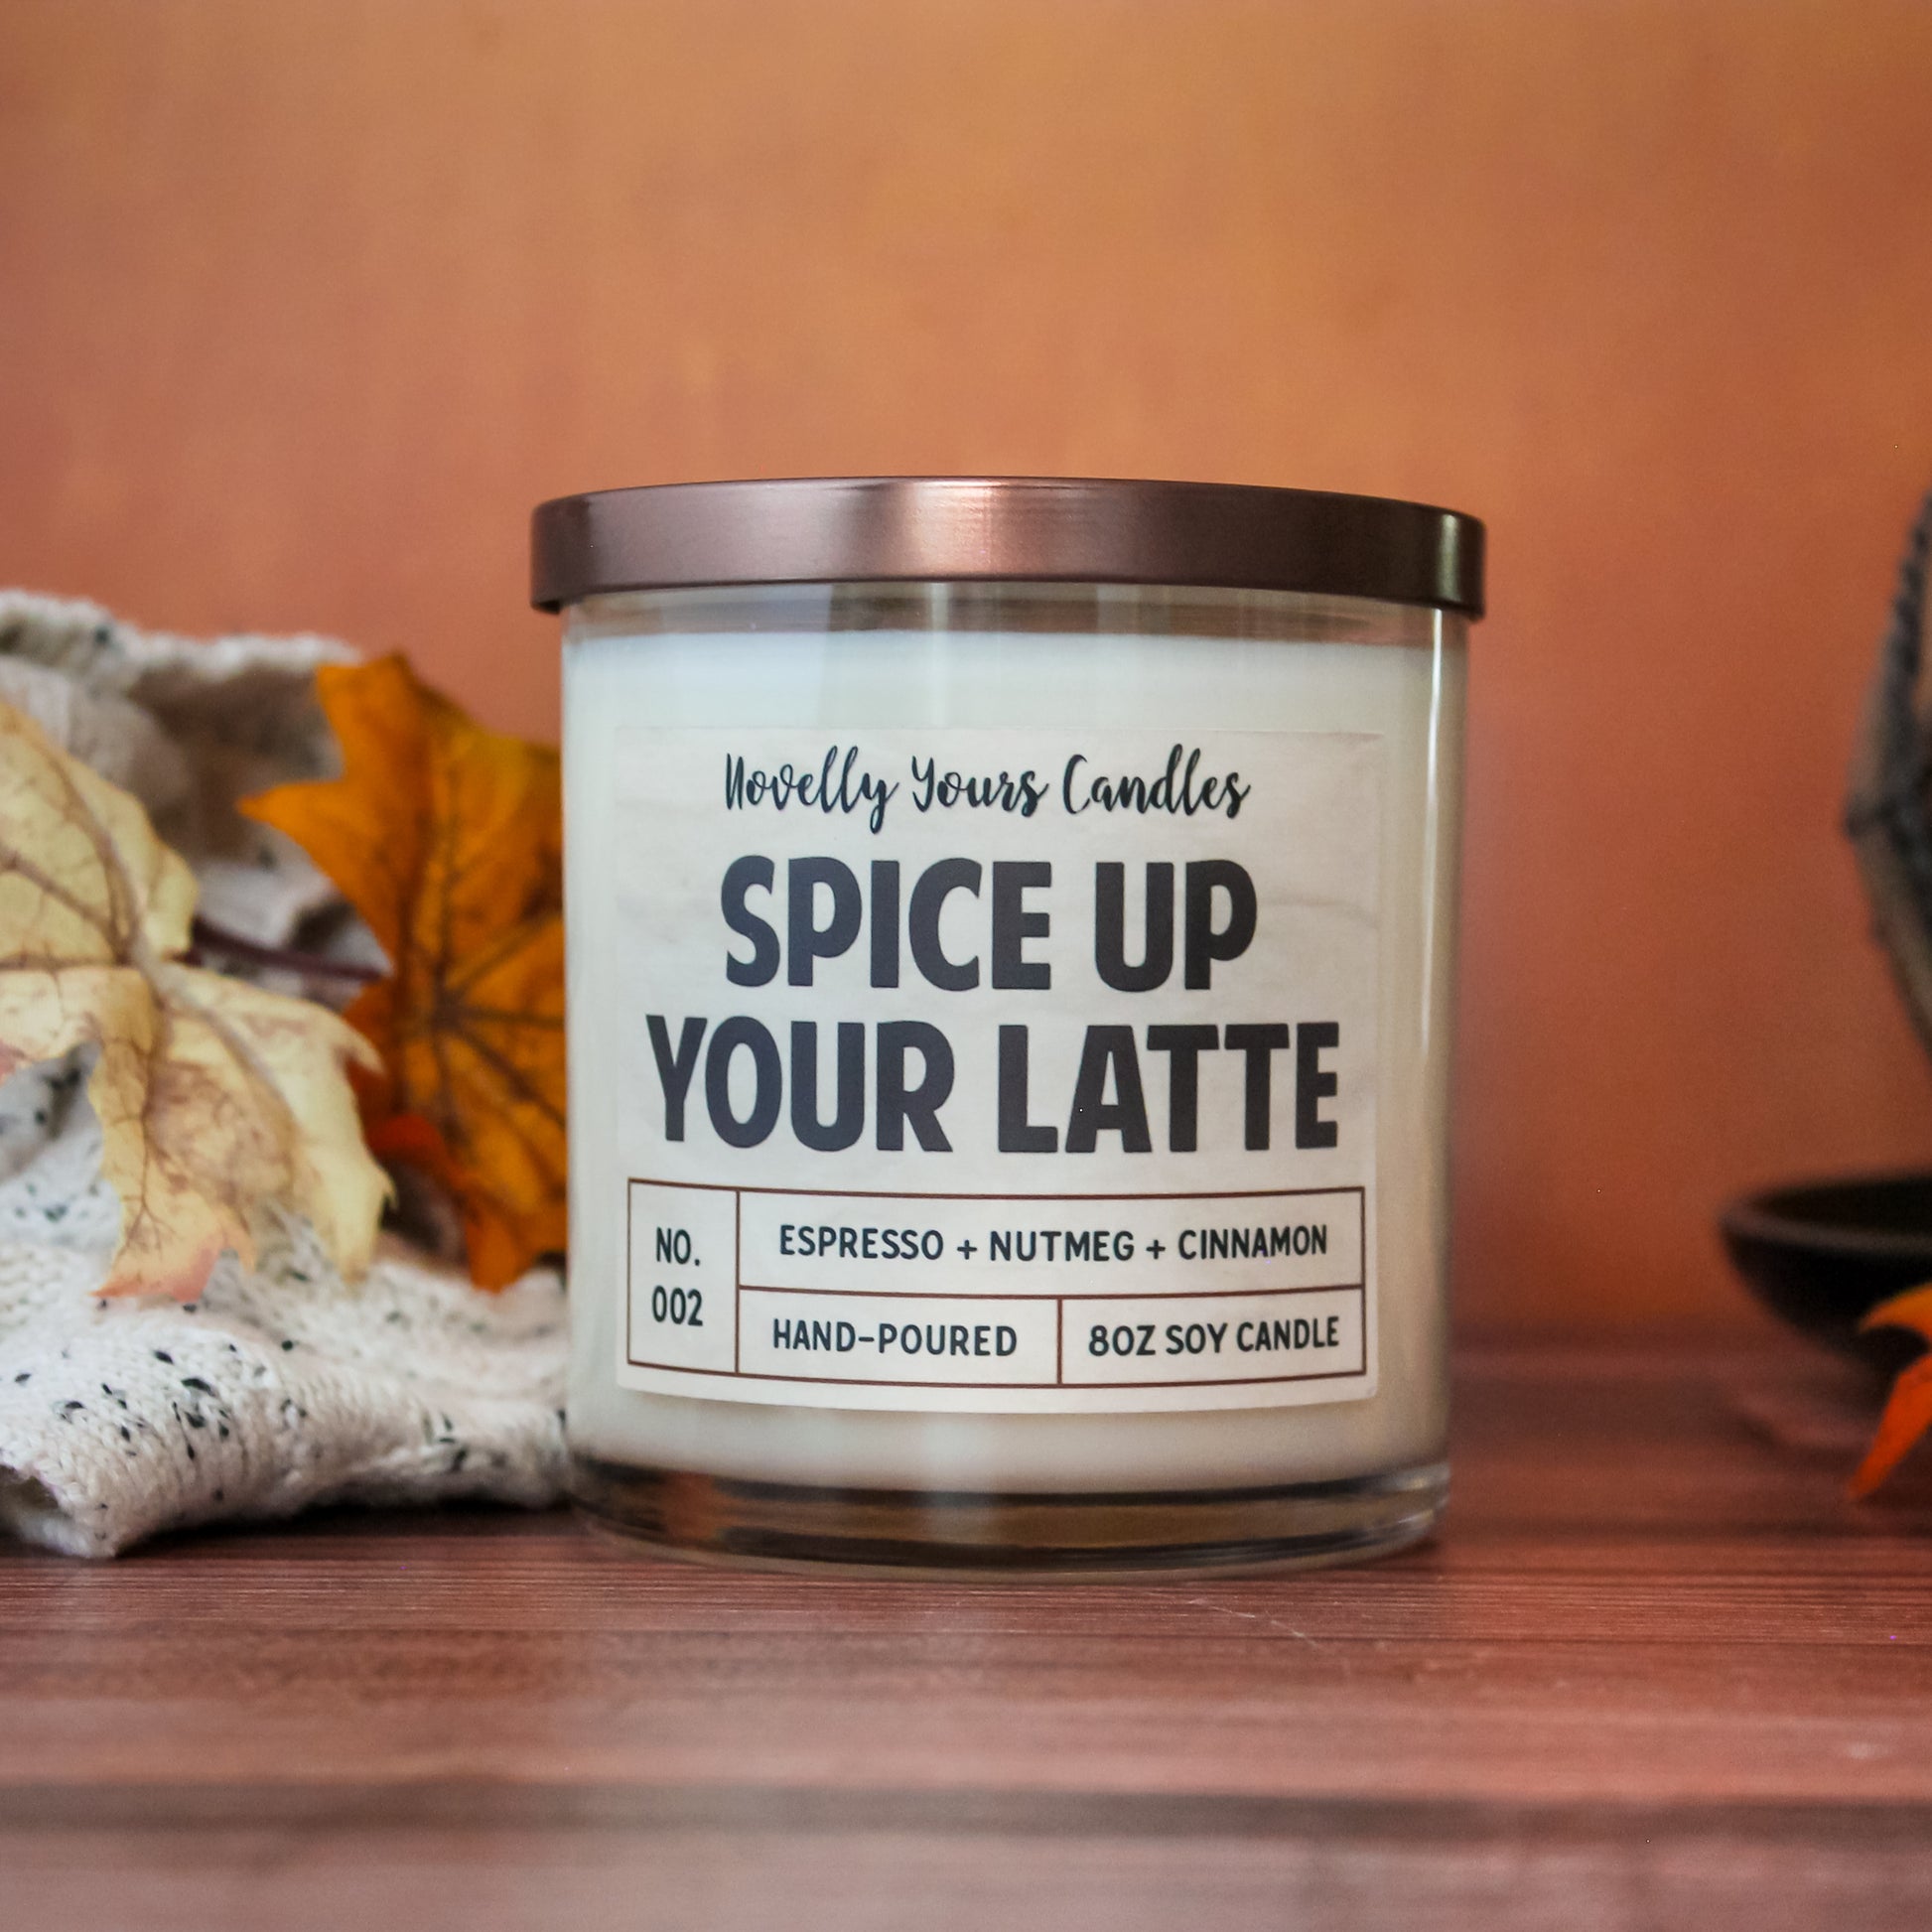 Spice Up Your Latte